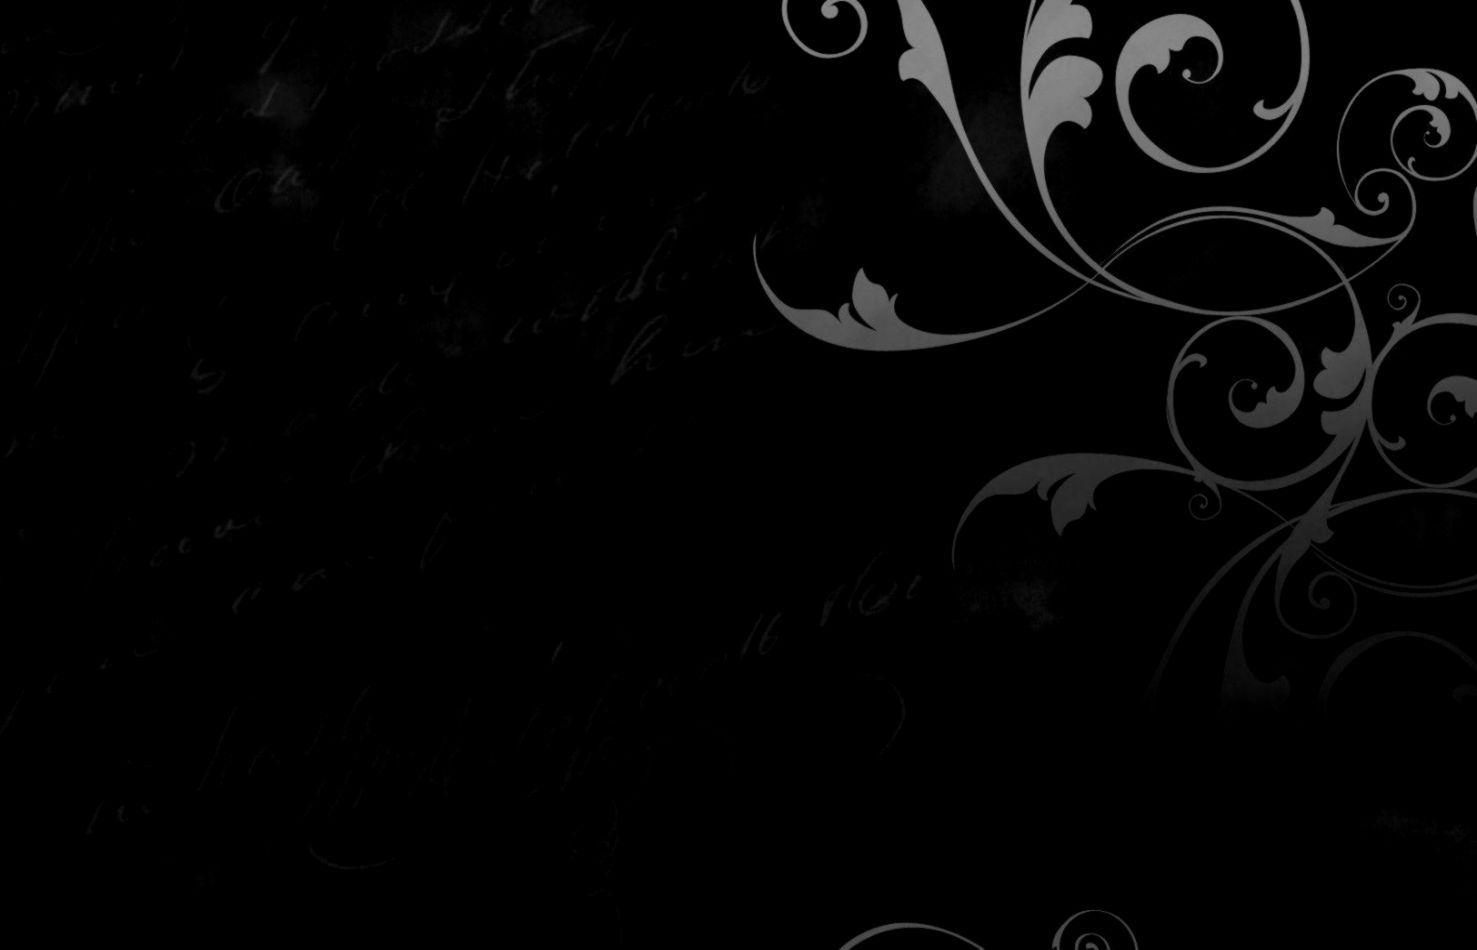 Black and Silver Wallpapers - Top Free Black and Silver Backgrounds